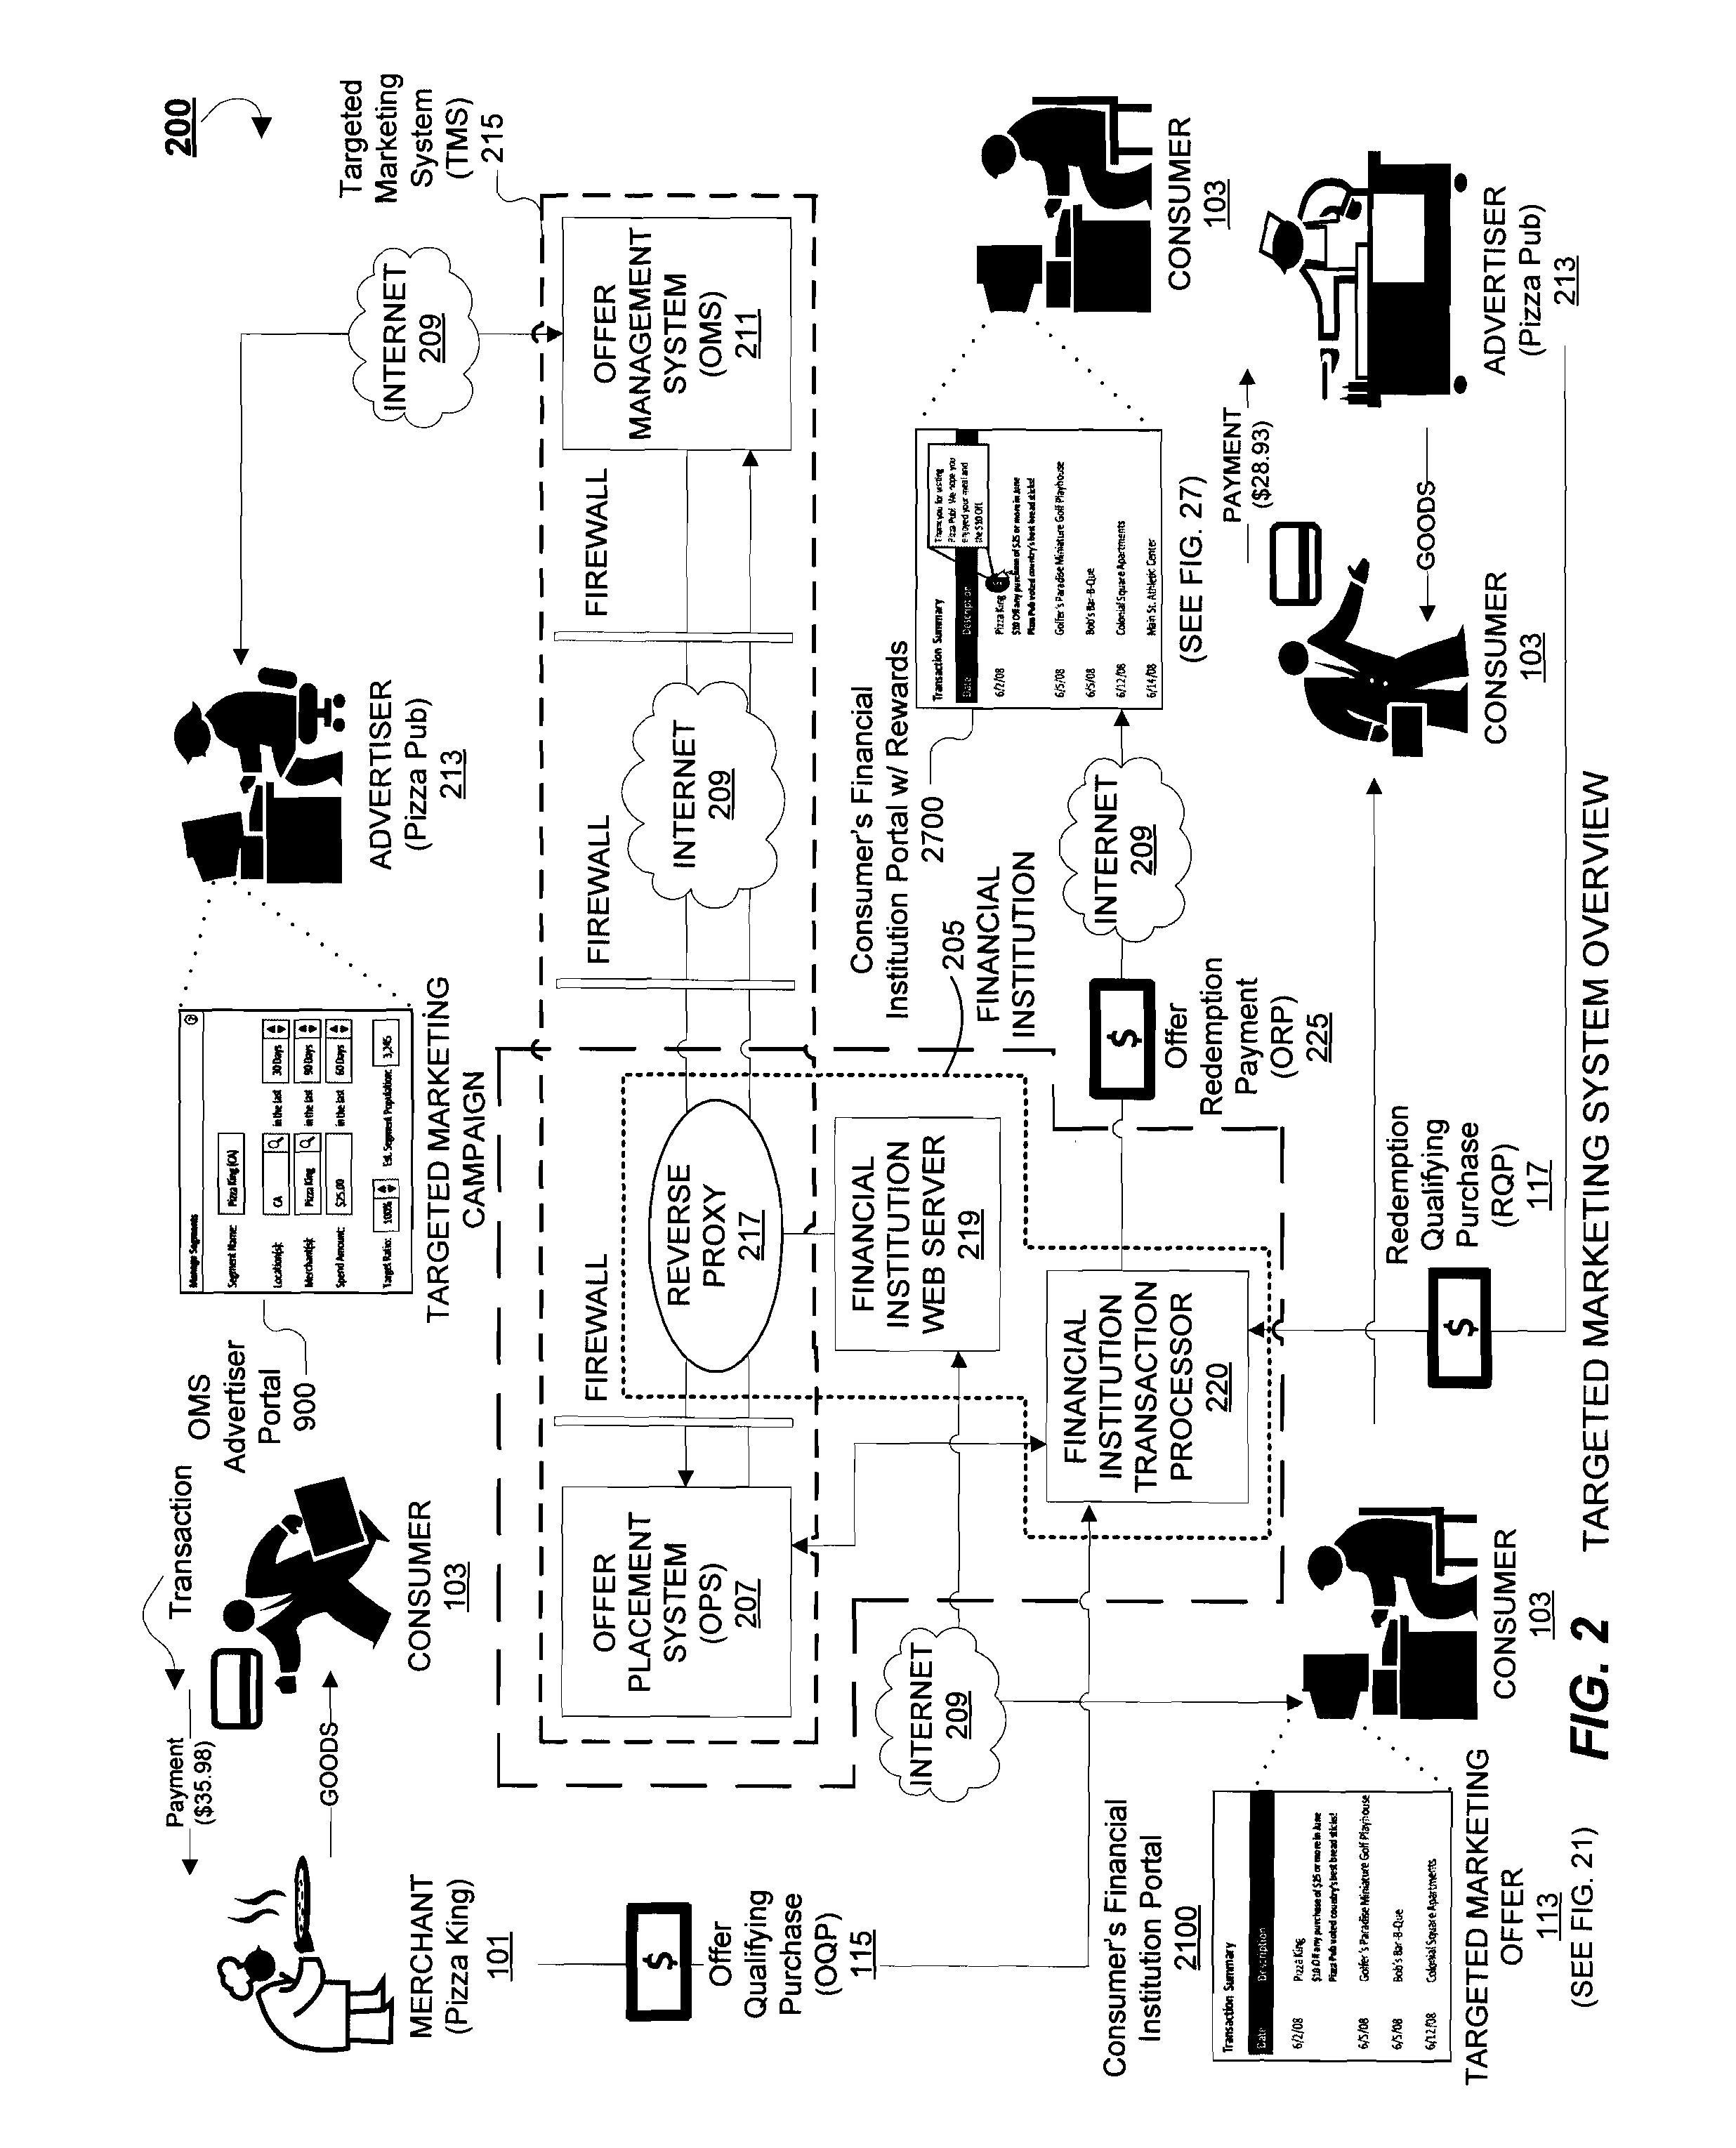 System and Methods for Offer Realization and Redemption in a Targeted Marketing Offer Delivery System